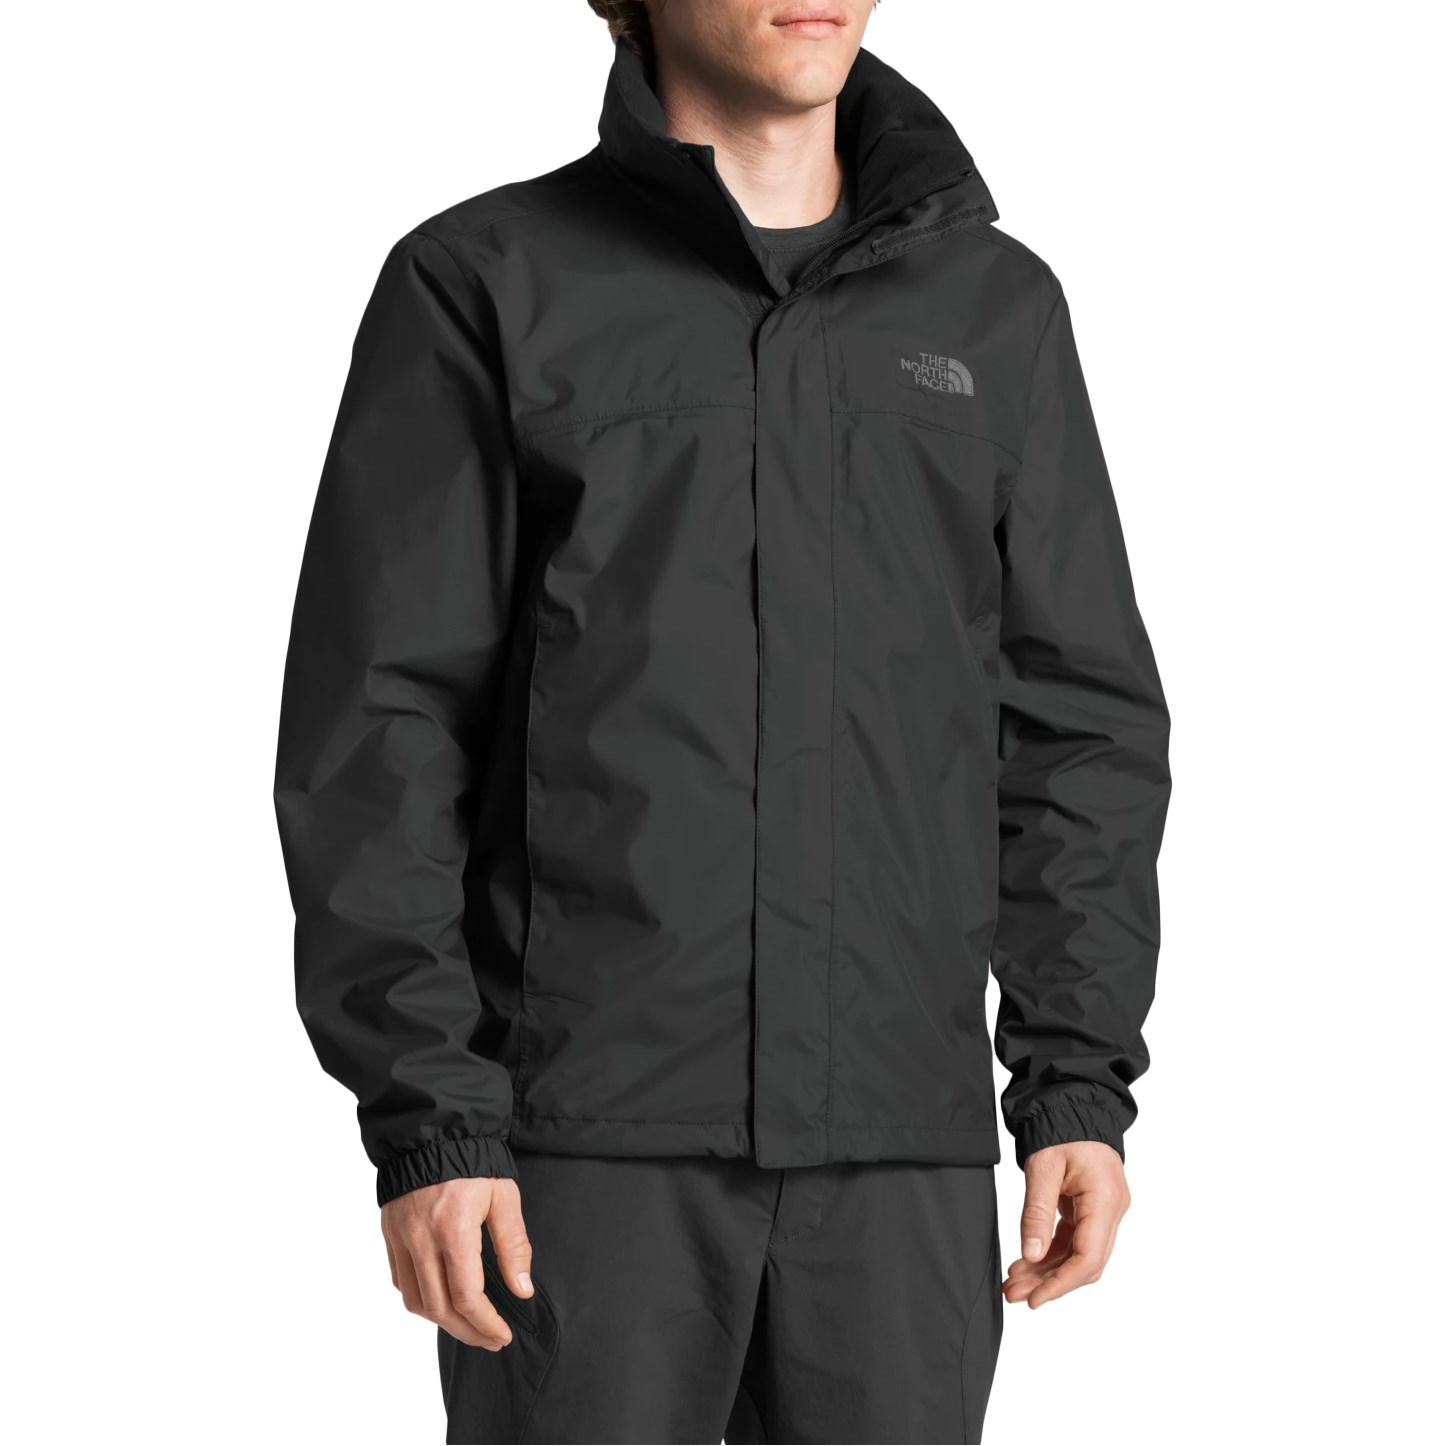 north face resolve 2 jacket review